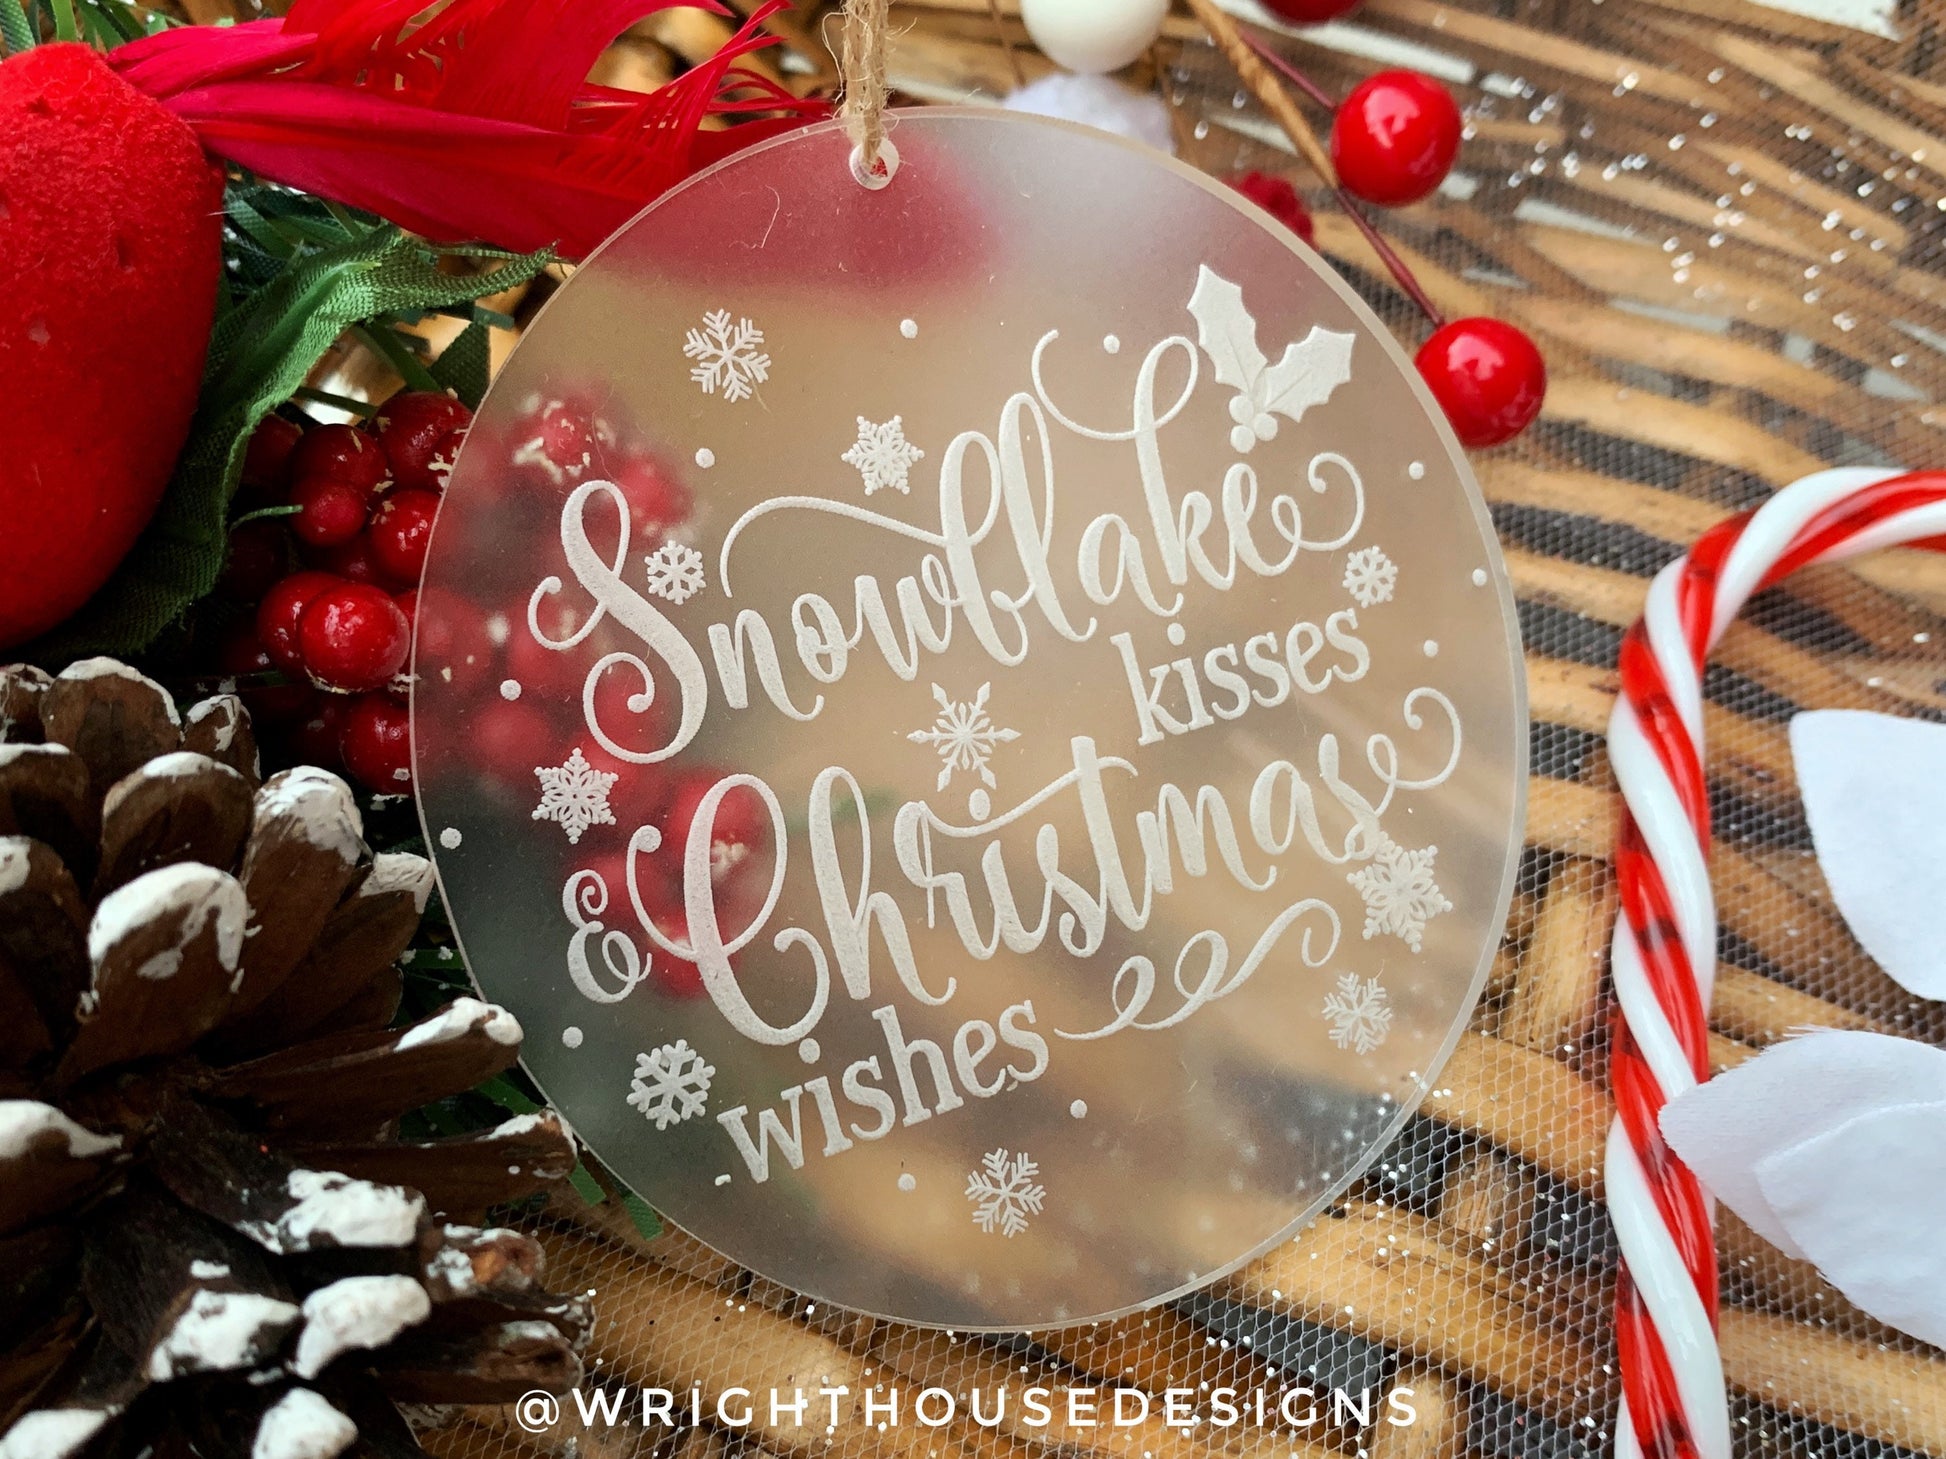 Snowflakes Are Kisses From Heaven - Laser Engraved Frosted Acrylic - Memorial Christmas Tree Ornament